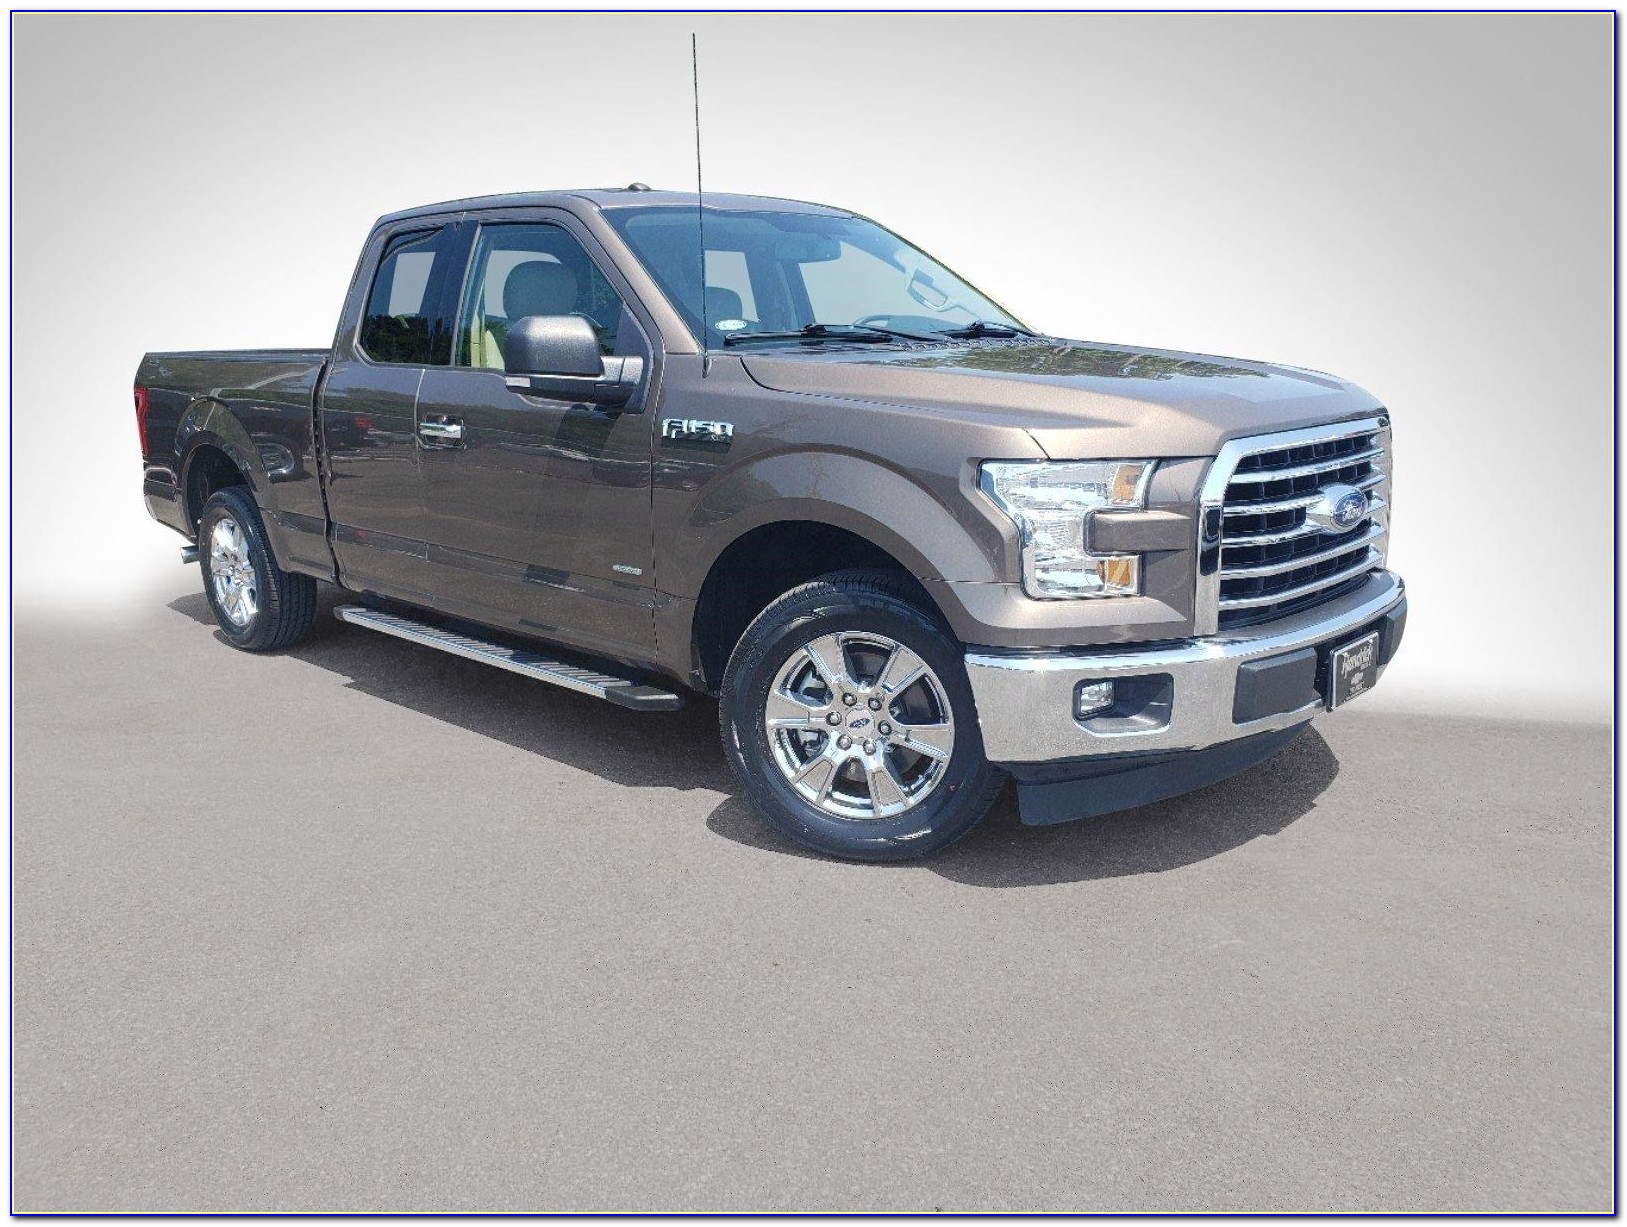 2016 Ford F 150 Towing Brochure